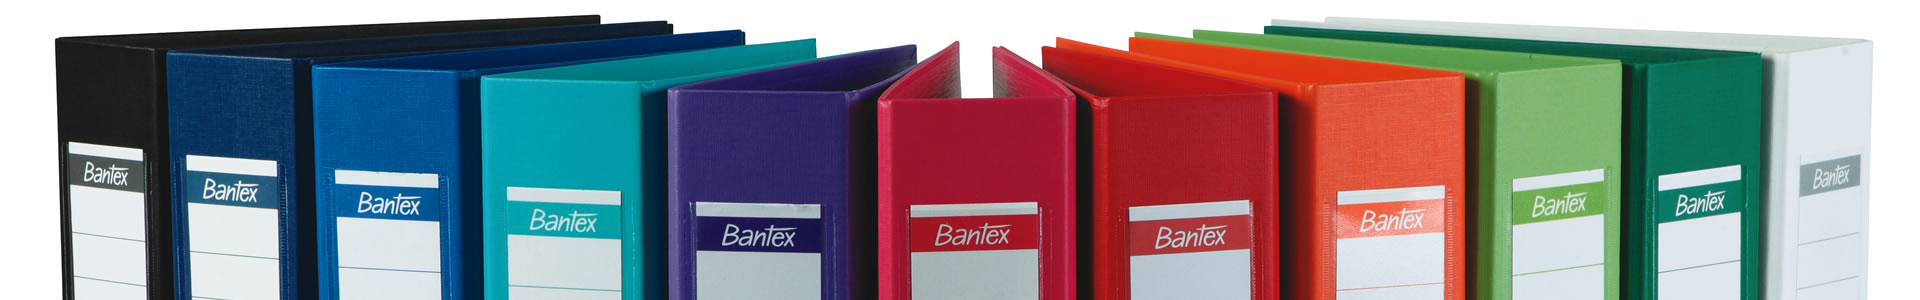 JP&S Stationers - Bantex Lever Arch Files